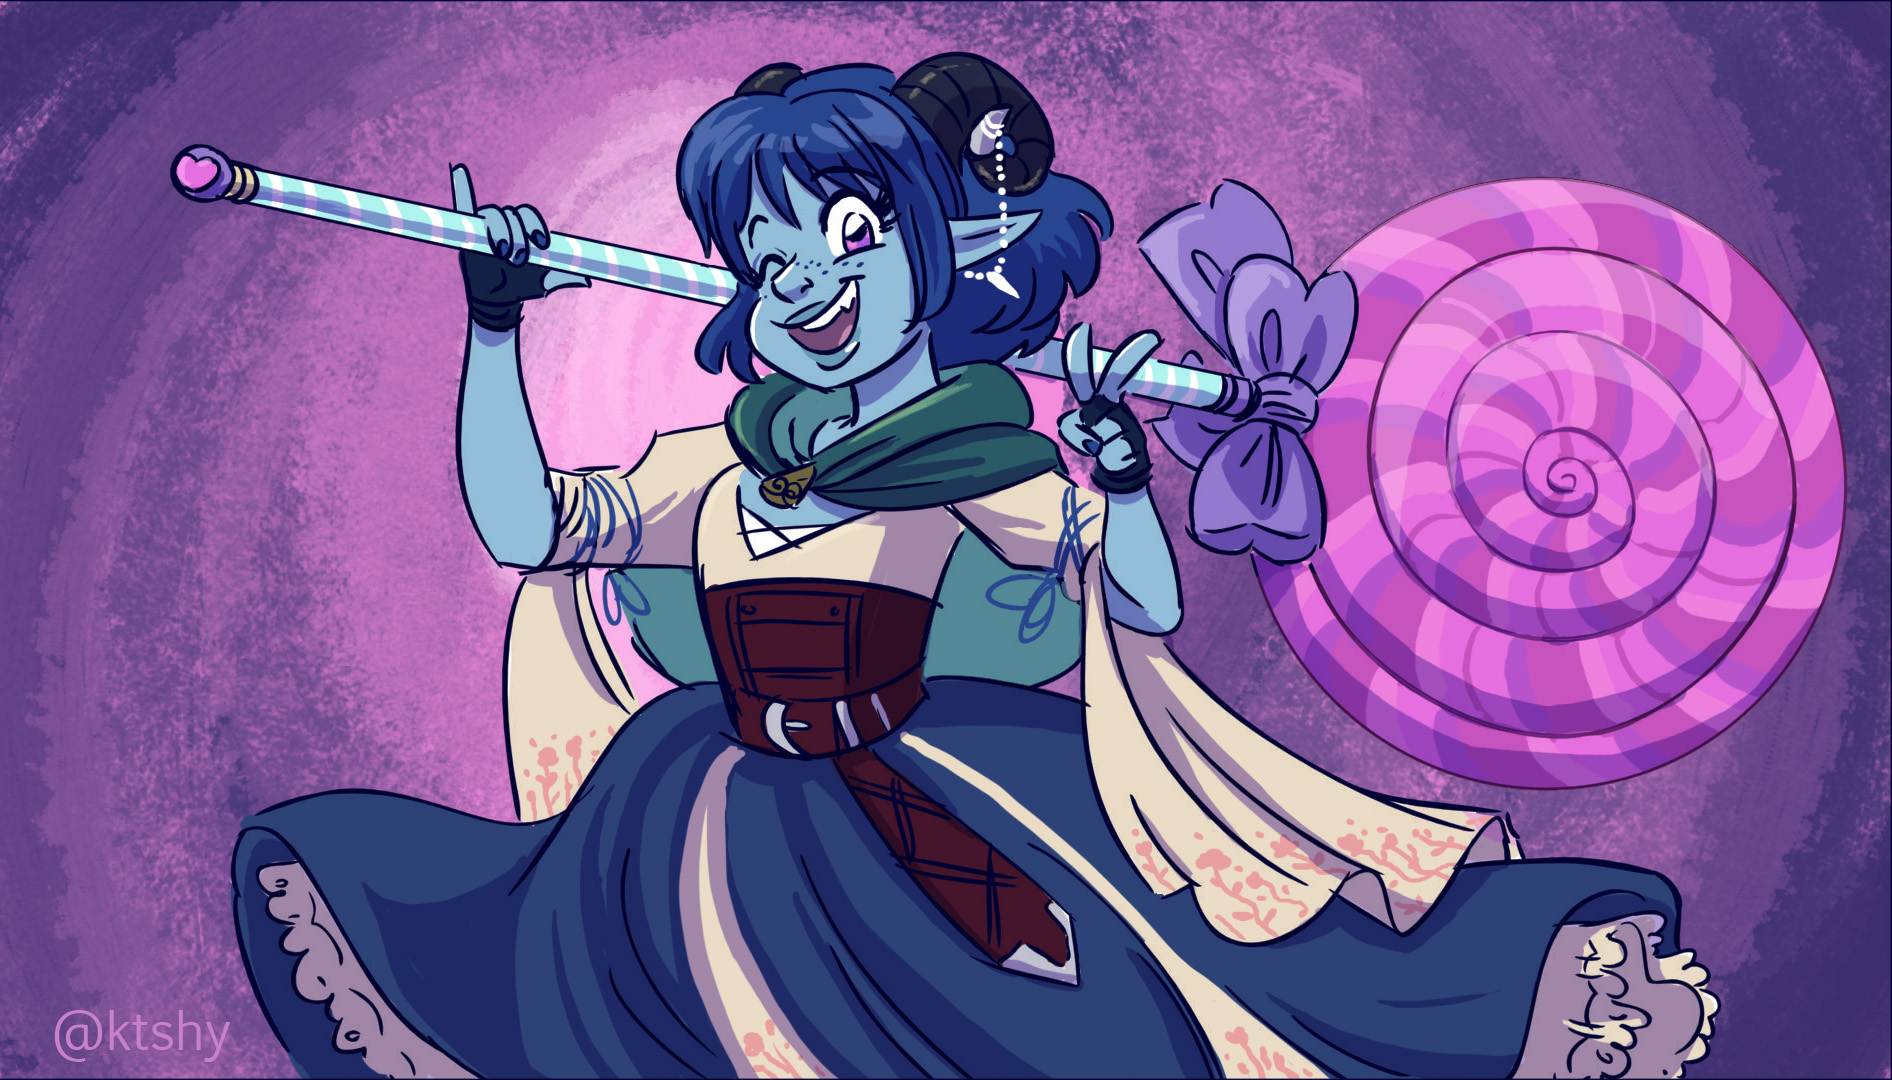  Jester from Critical Role. 